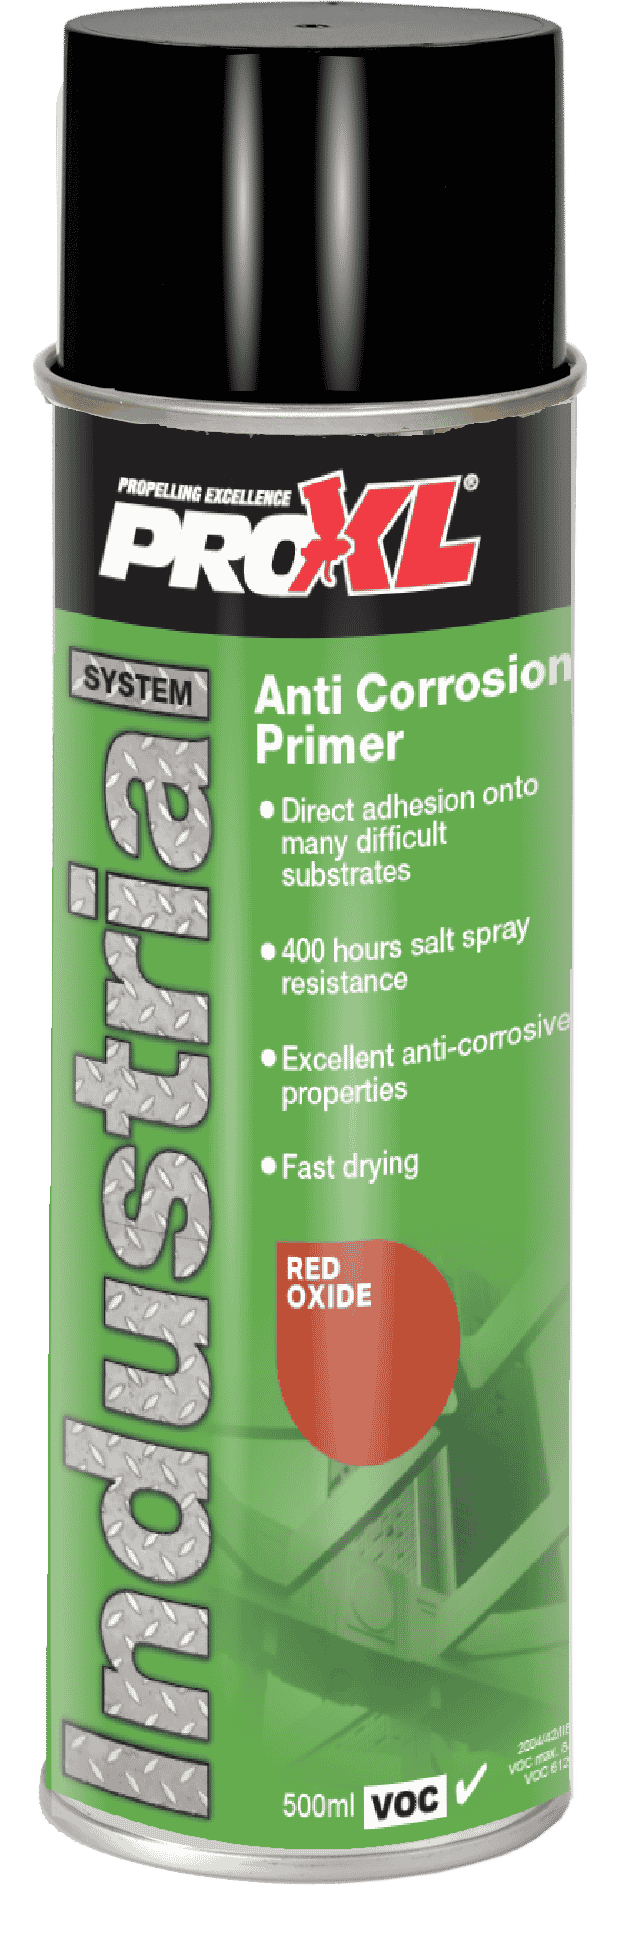 Anti-Corrosion Primer- Red Oxide (500ml) Product Image